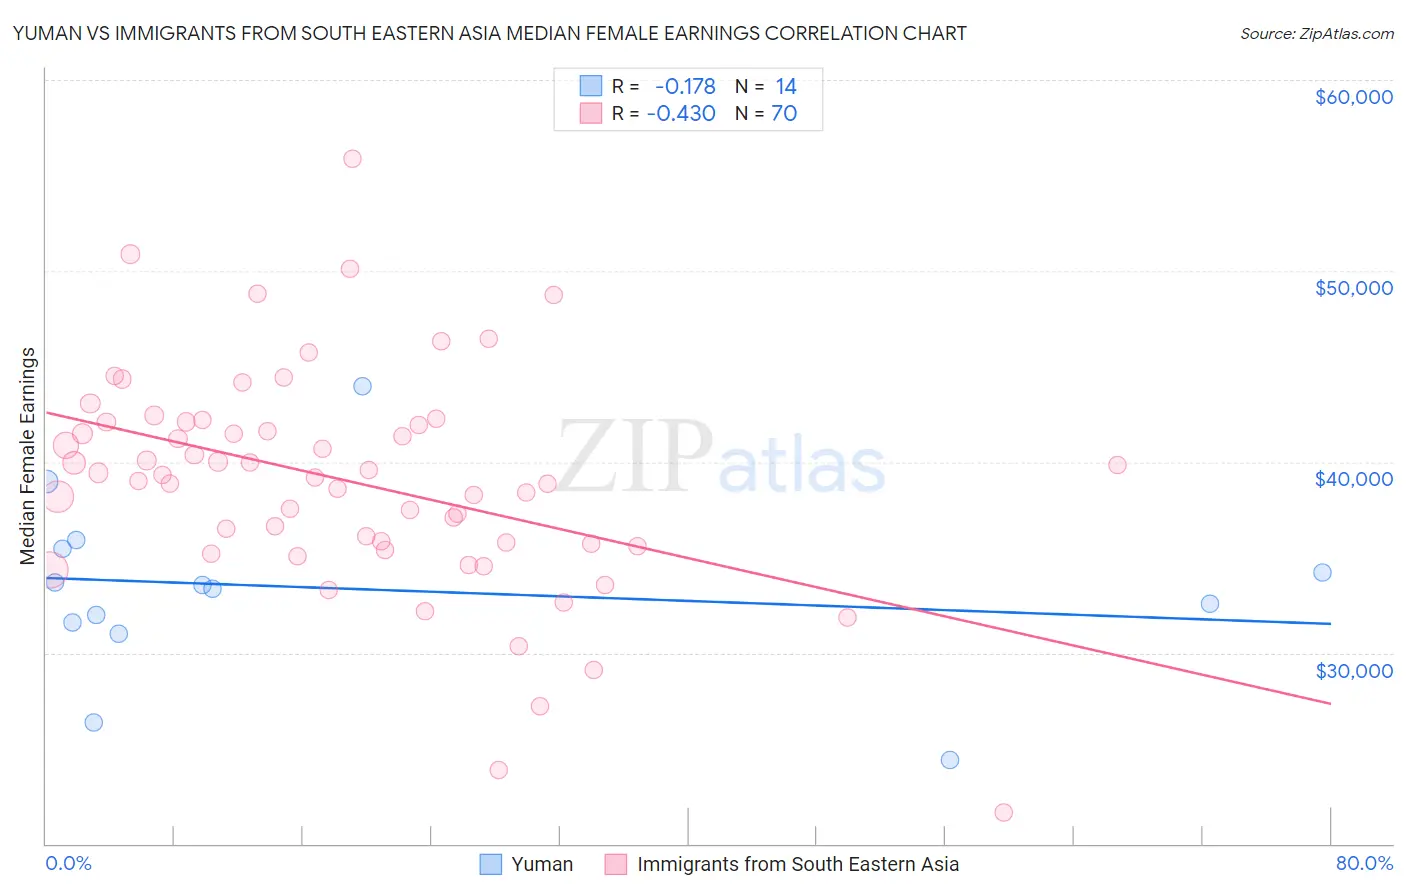 Yuman vs Immigrants from South Eastern Asia Median Female Earnings